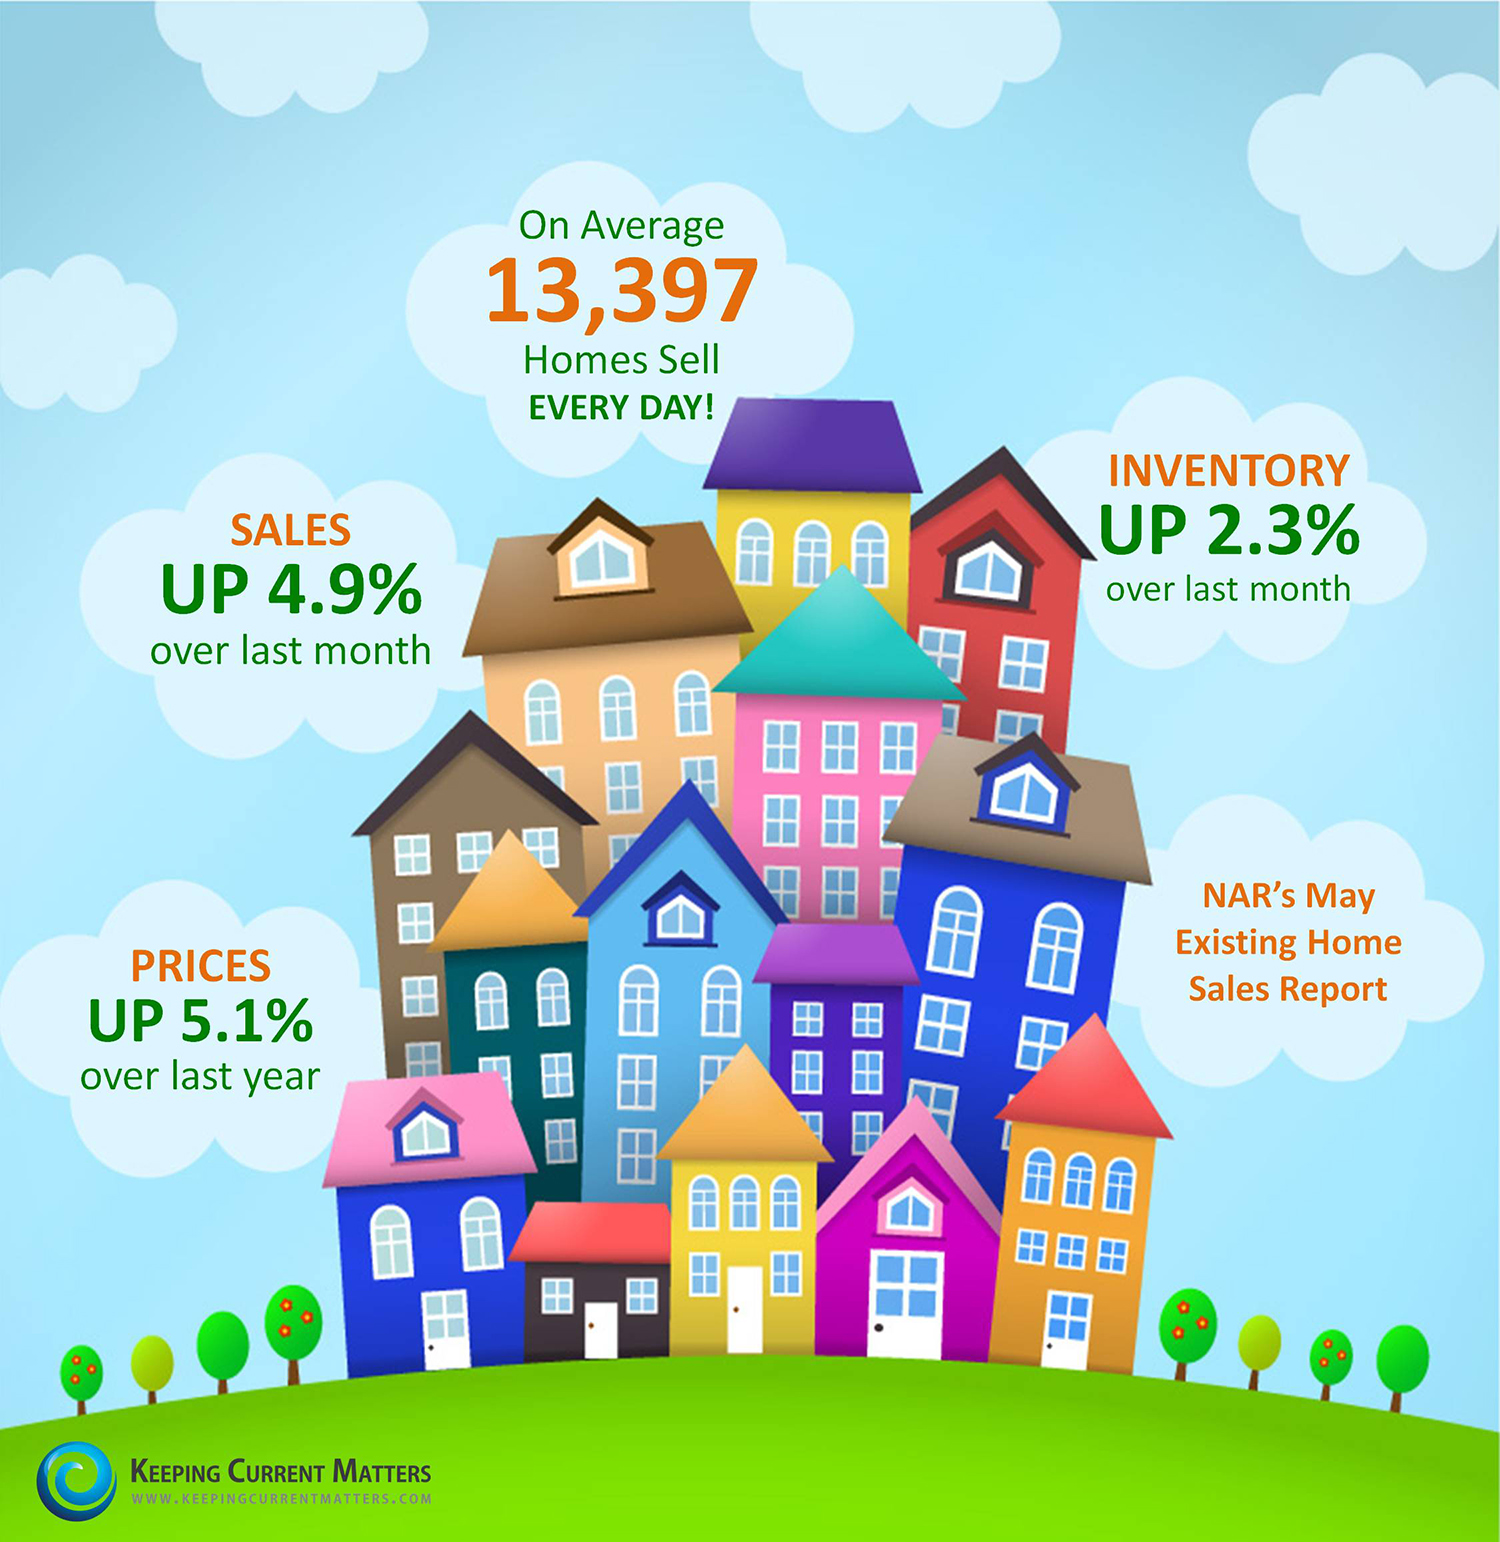 NAR's Existing Home Sales Report | Keeping Current Matters